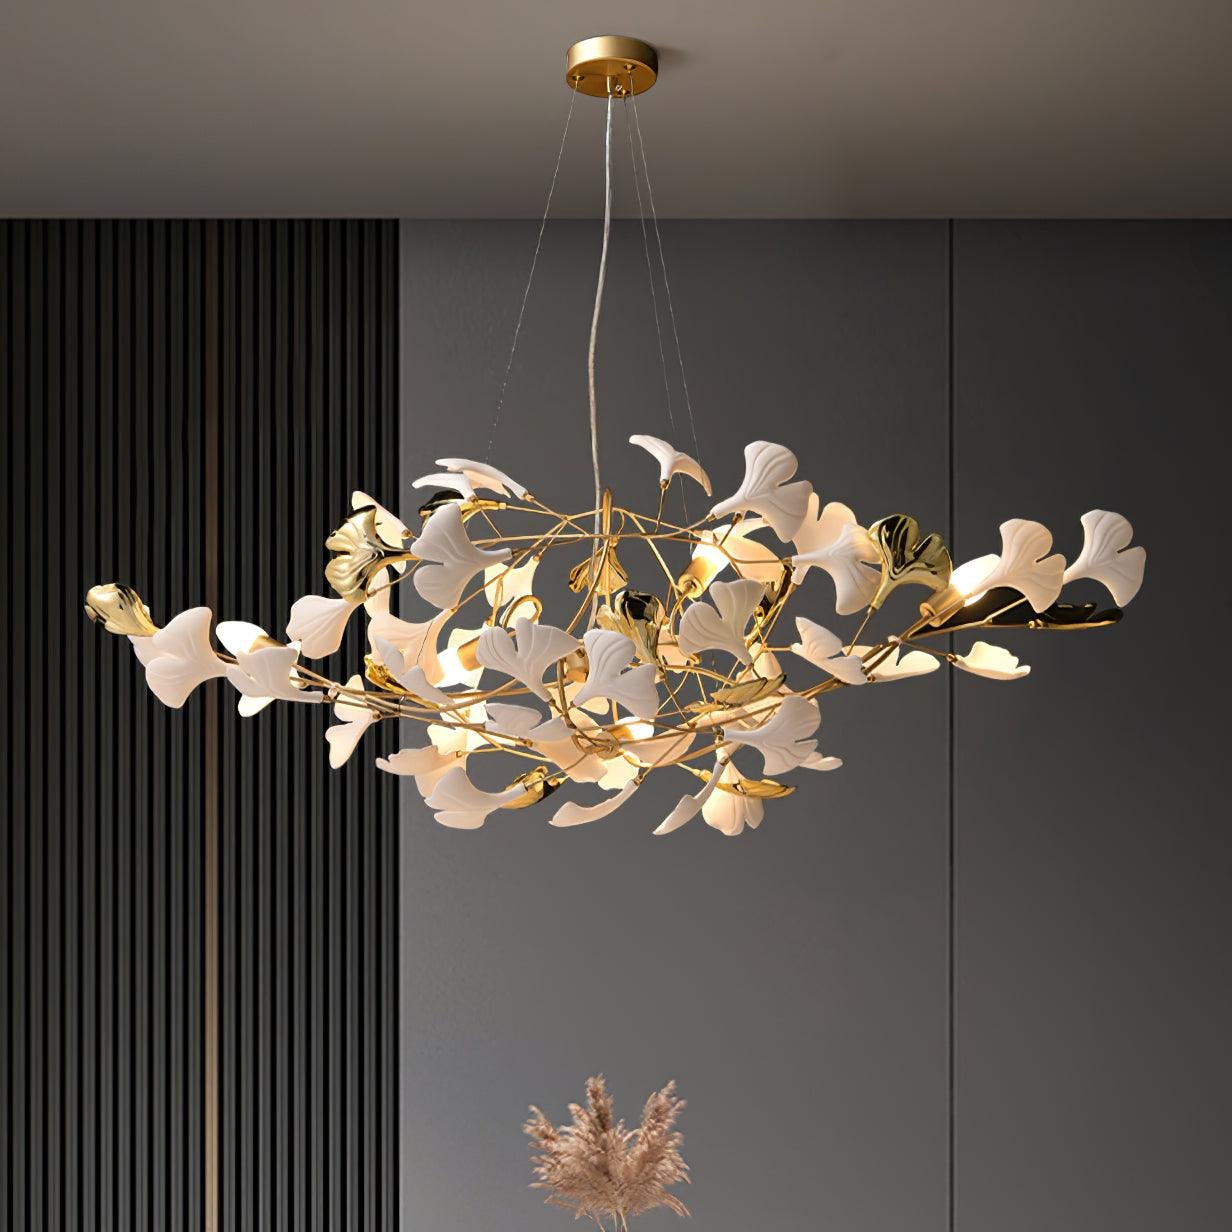 Gold and White Gingko Chandelier in Small-Large Size (59″ x 19.7″, 150cm x 50cm)